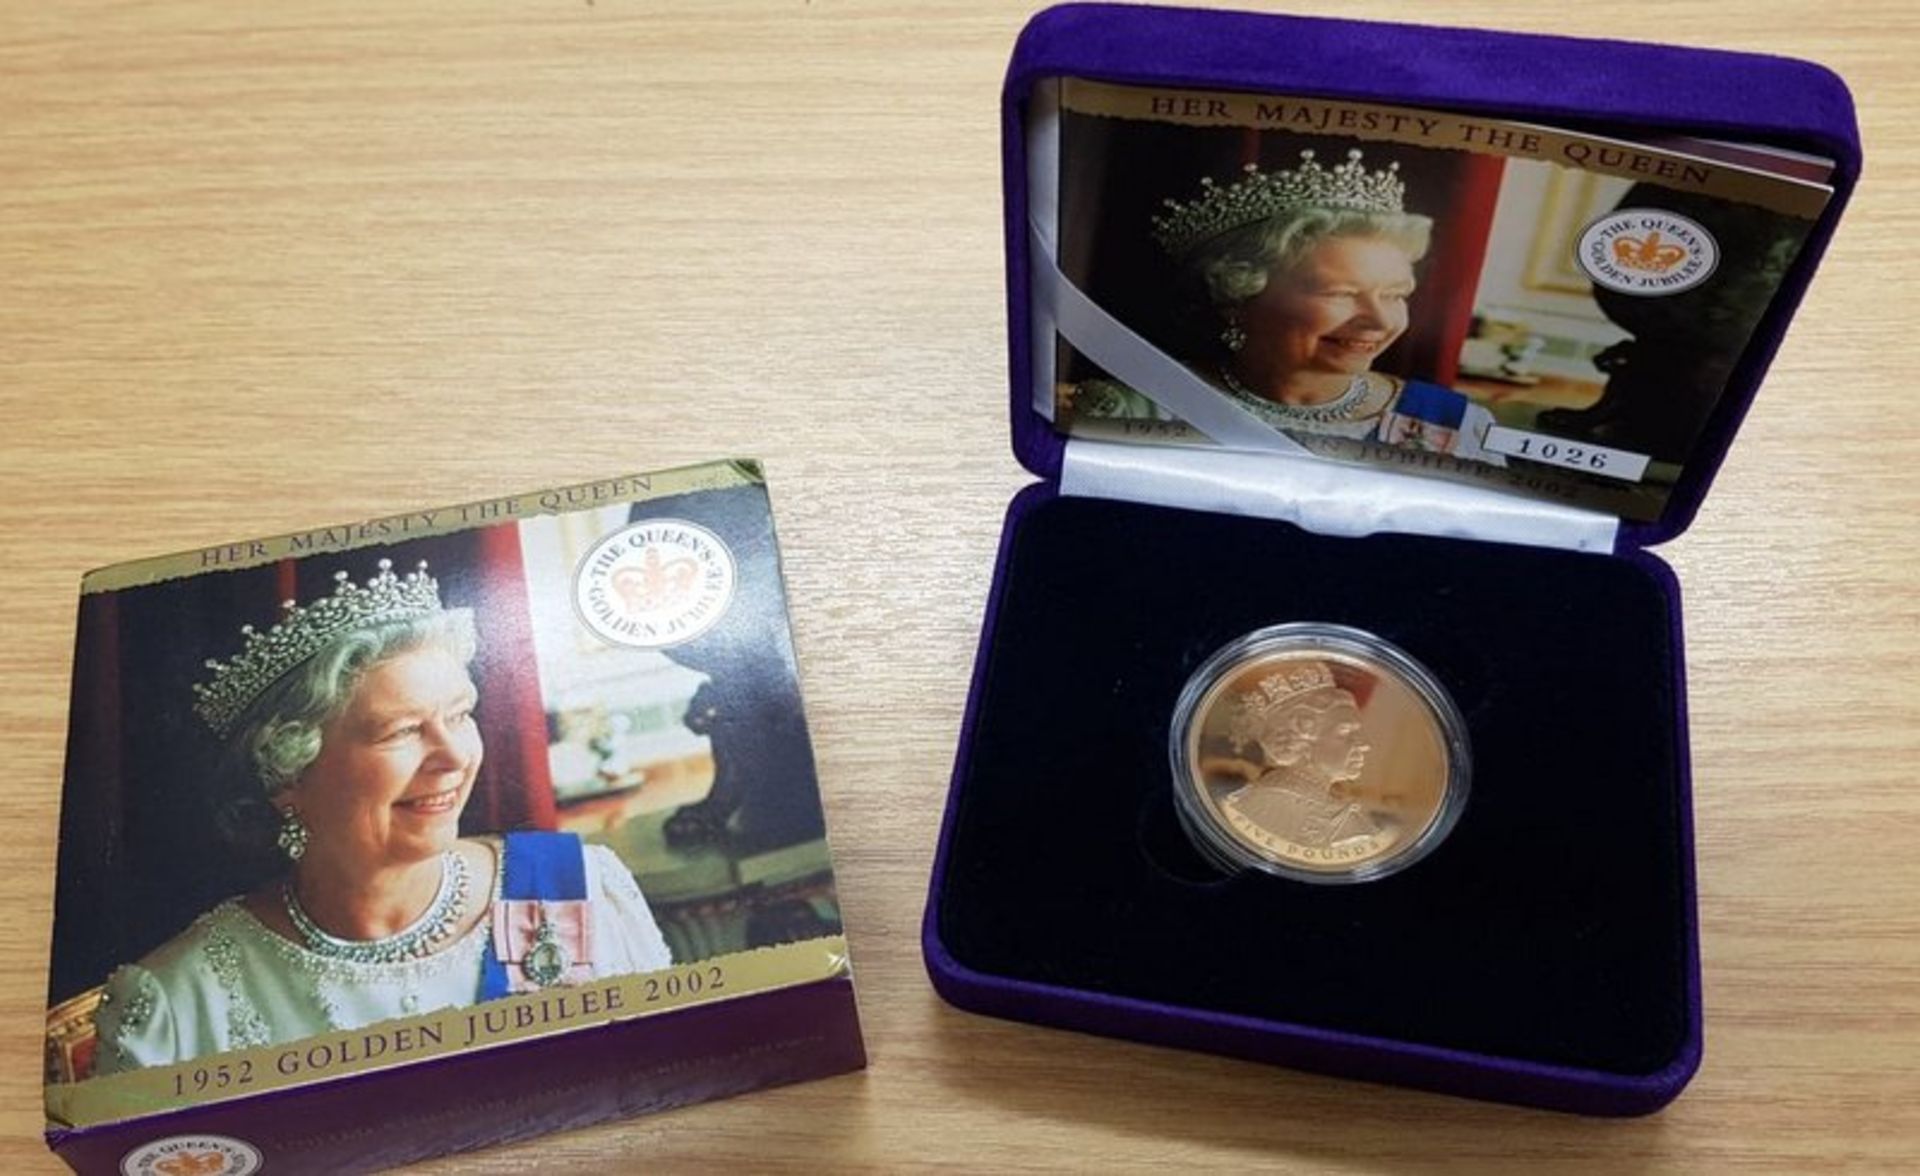 2002 - Gold Five Pound Proof Coin, Golden Jubilee Boxed - Image 5 of 6